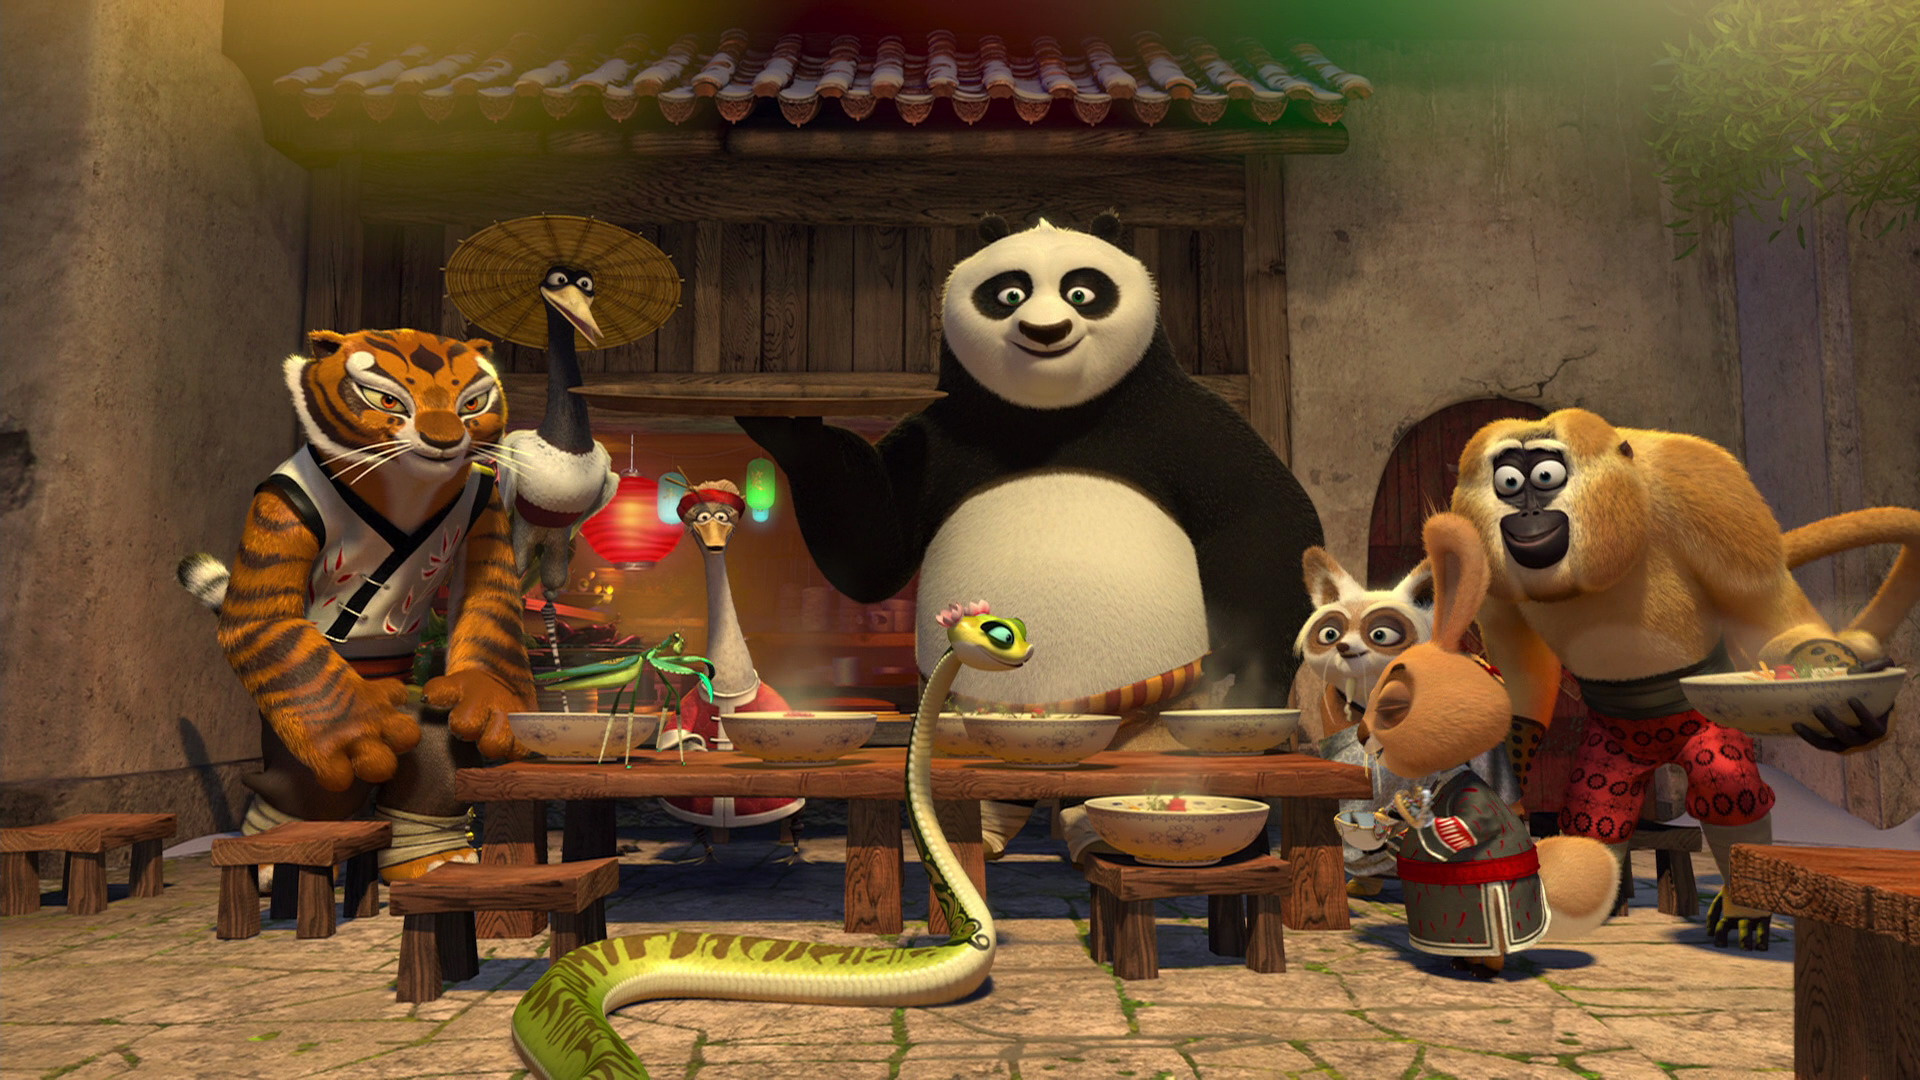 Master Shifu: A member of the Former Furious Five—alongside Fenghuang, Rooster, Elephant, and Snow Leopard. 1920x1080 Full HD Background.